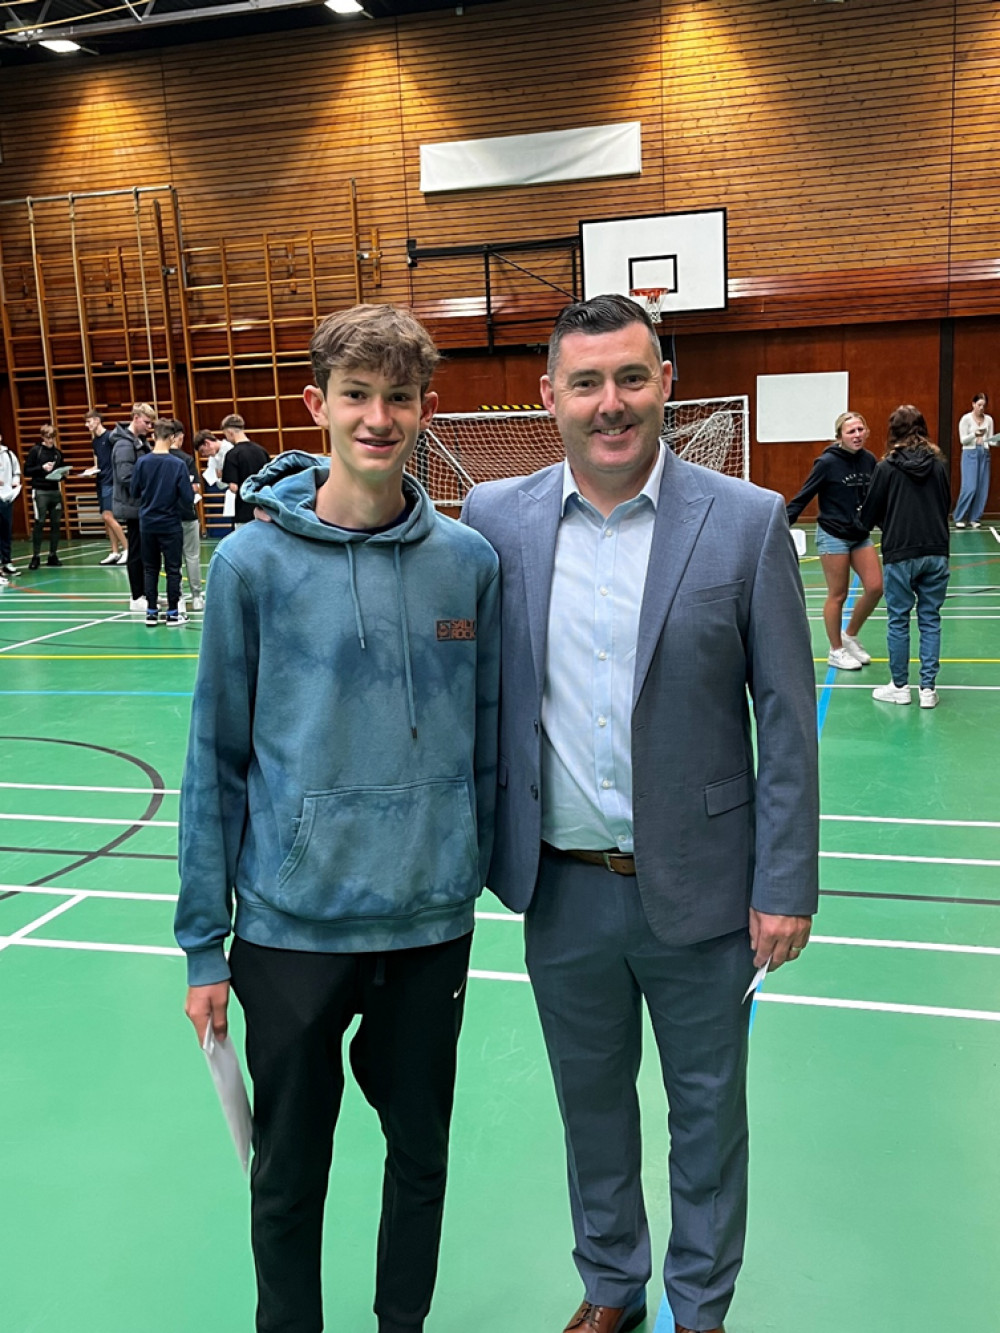 Students at The National Church of England Academy in Hucknall are celebrating after achieving a strong set of GCSE results. Pictured: Highest performing student Jacob Hemsley with Head Teacher Martin Brailsford. Photo courtesy of The National Academy.